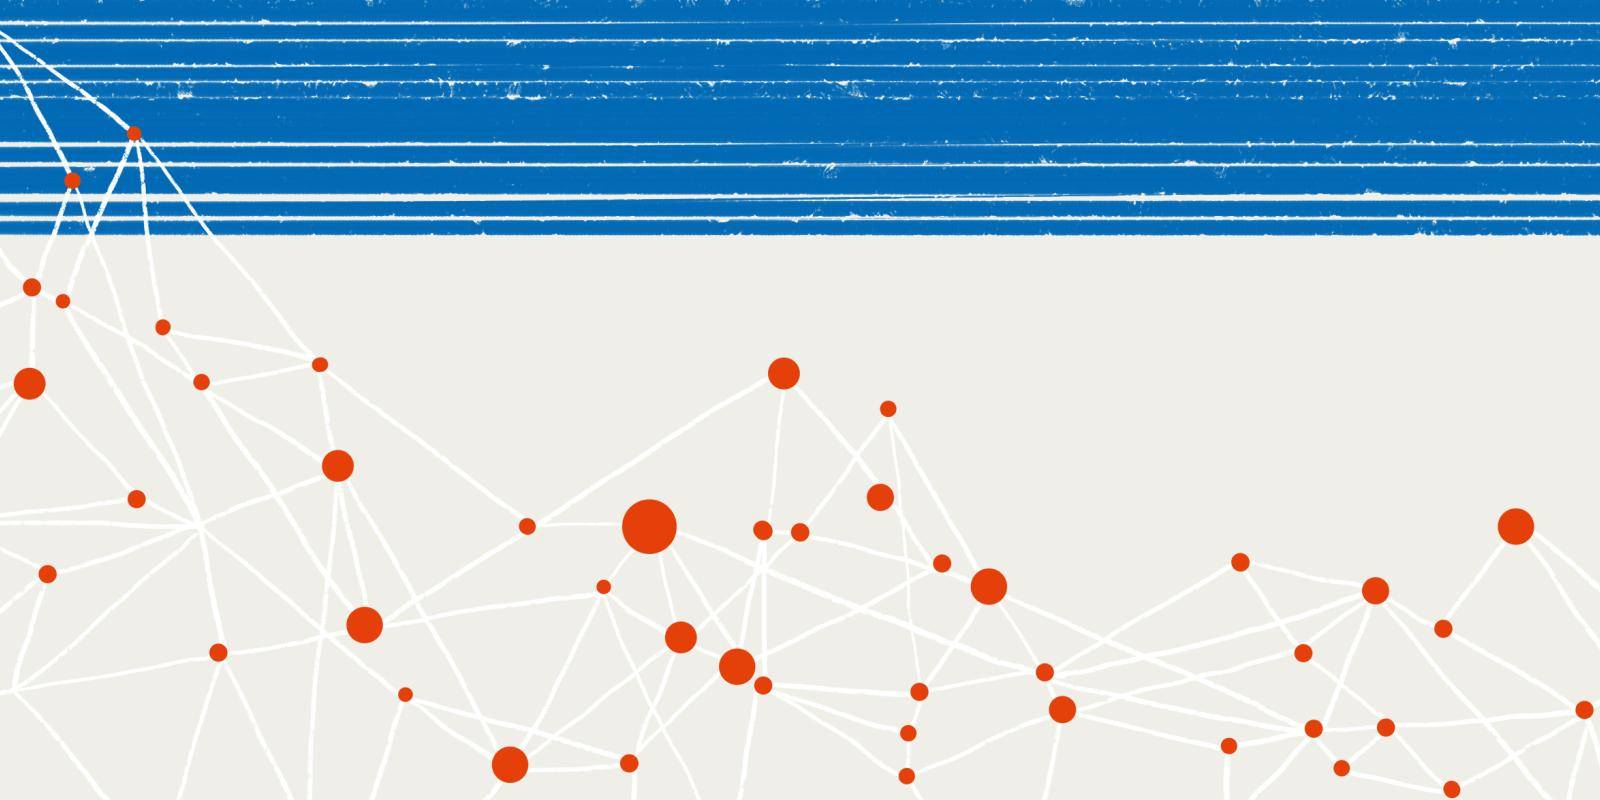 Illustration of a network with unnamed dots in red.